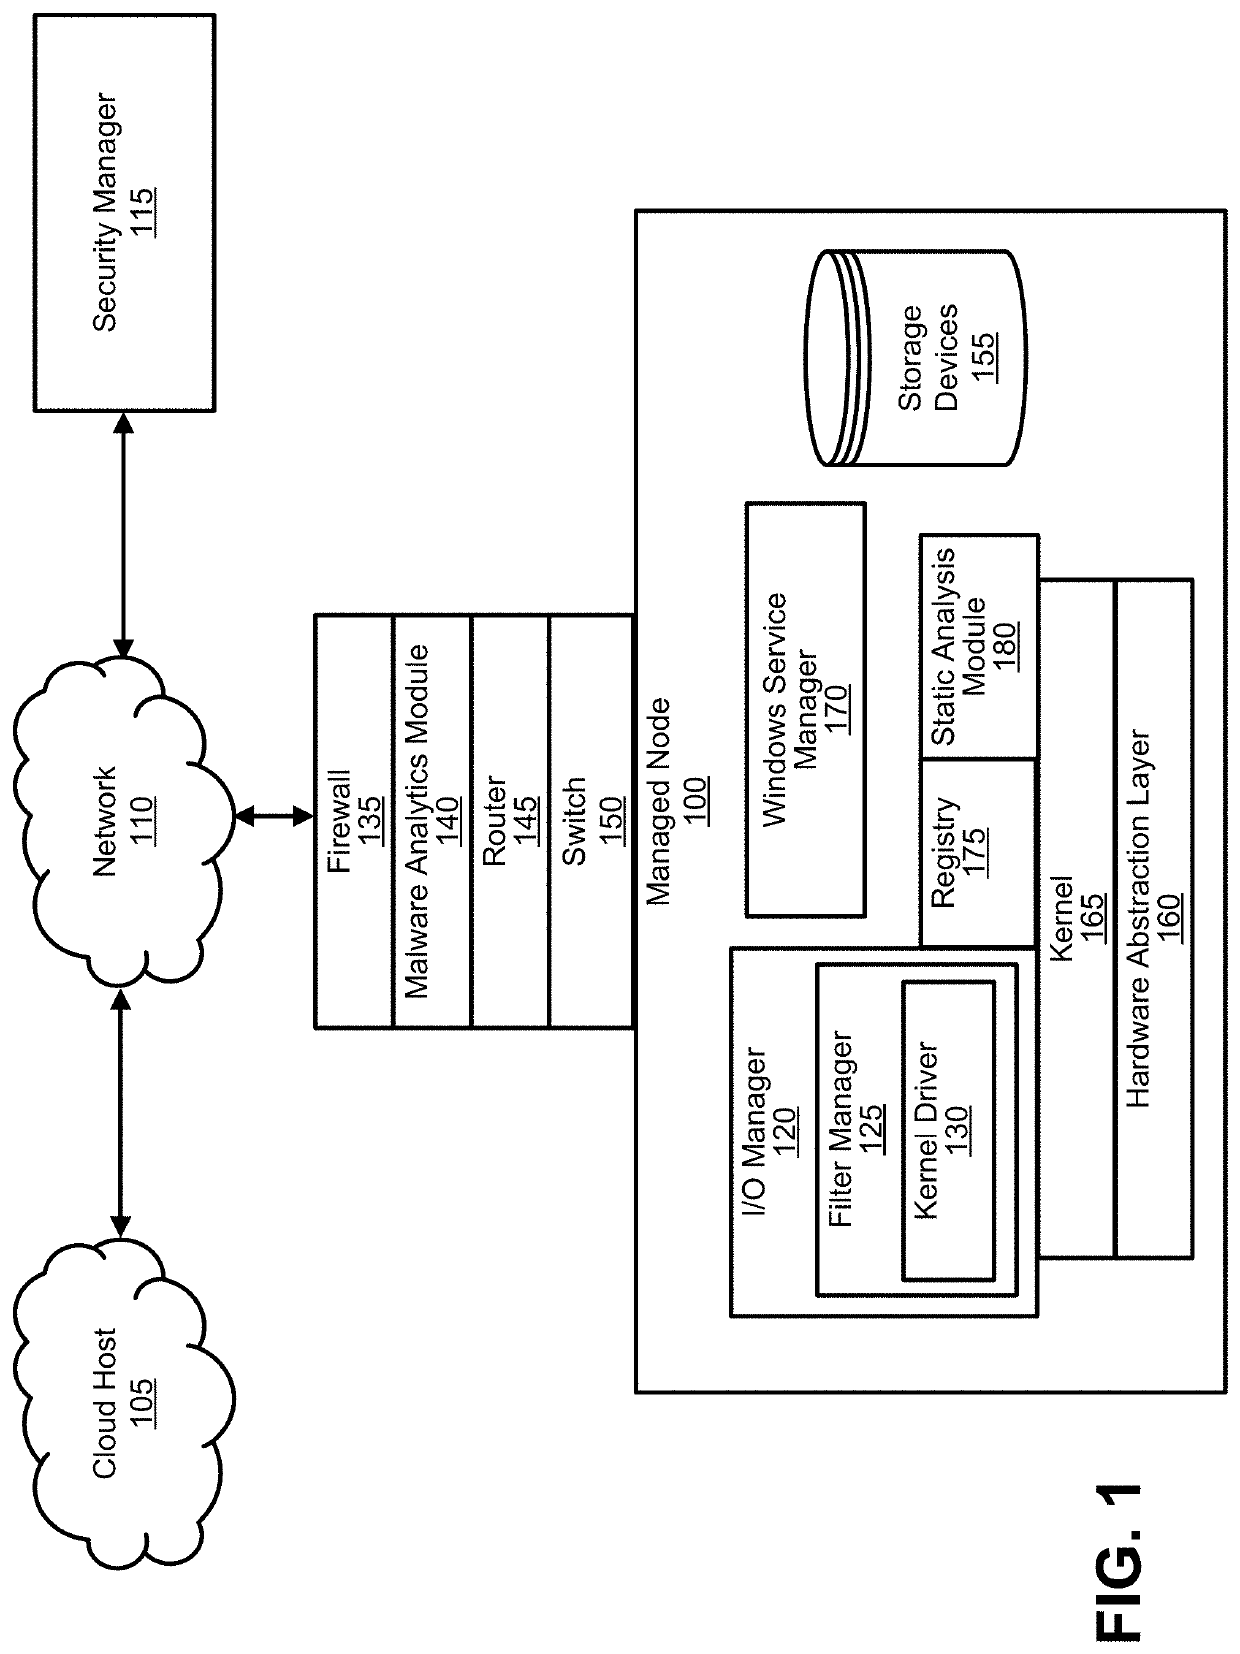 Real-time detection of and protection from malware and steganography in a kernel mode